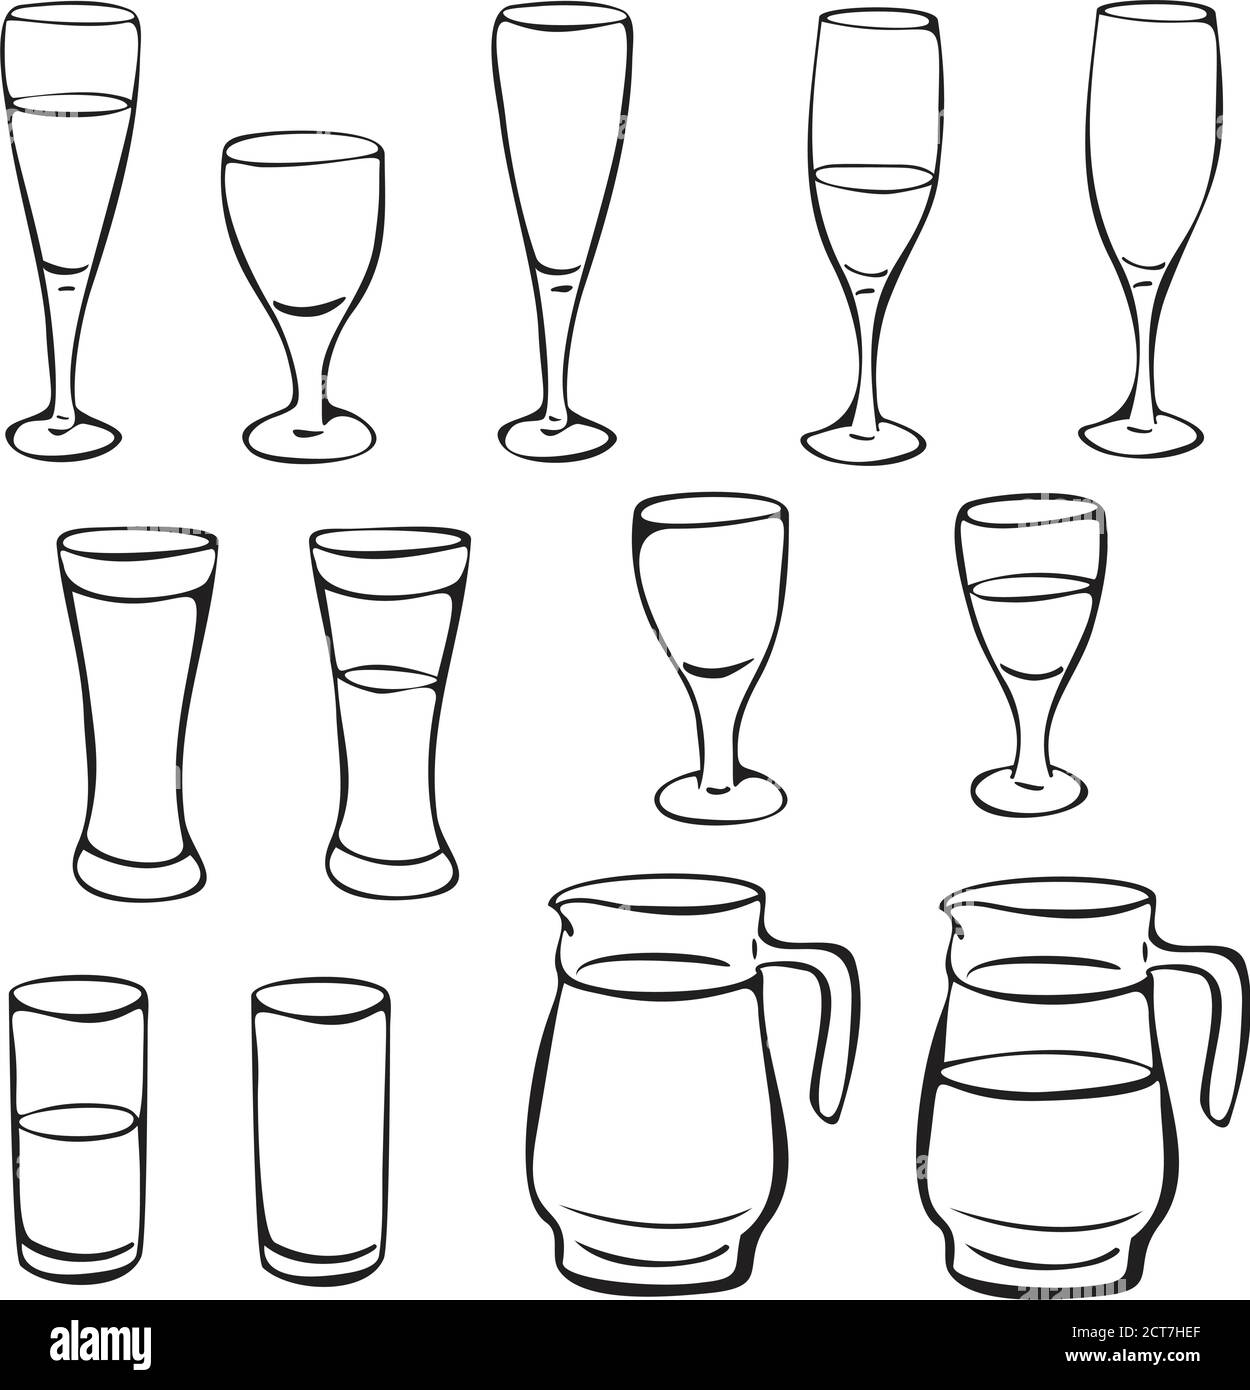 https://c8.alamy.com/comp/2CT7HEF/set-of-vector-glasses-with-different-shapes-black-and-white-glassware-collection-vector-illustration-2CT7HEF.jpg